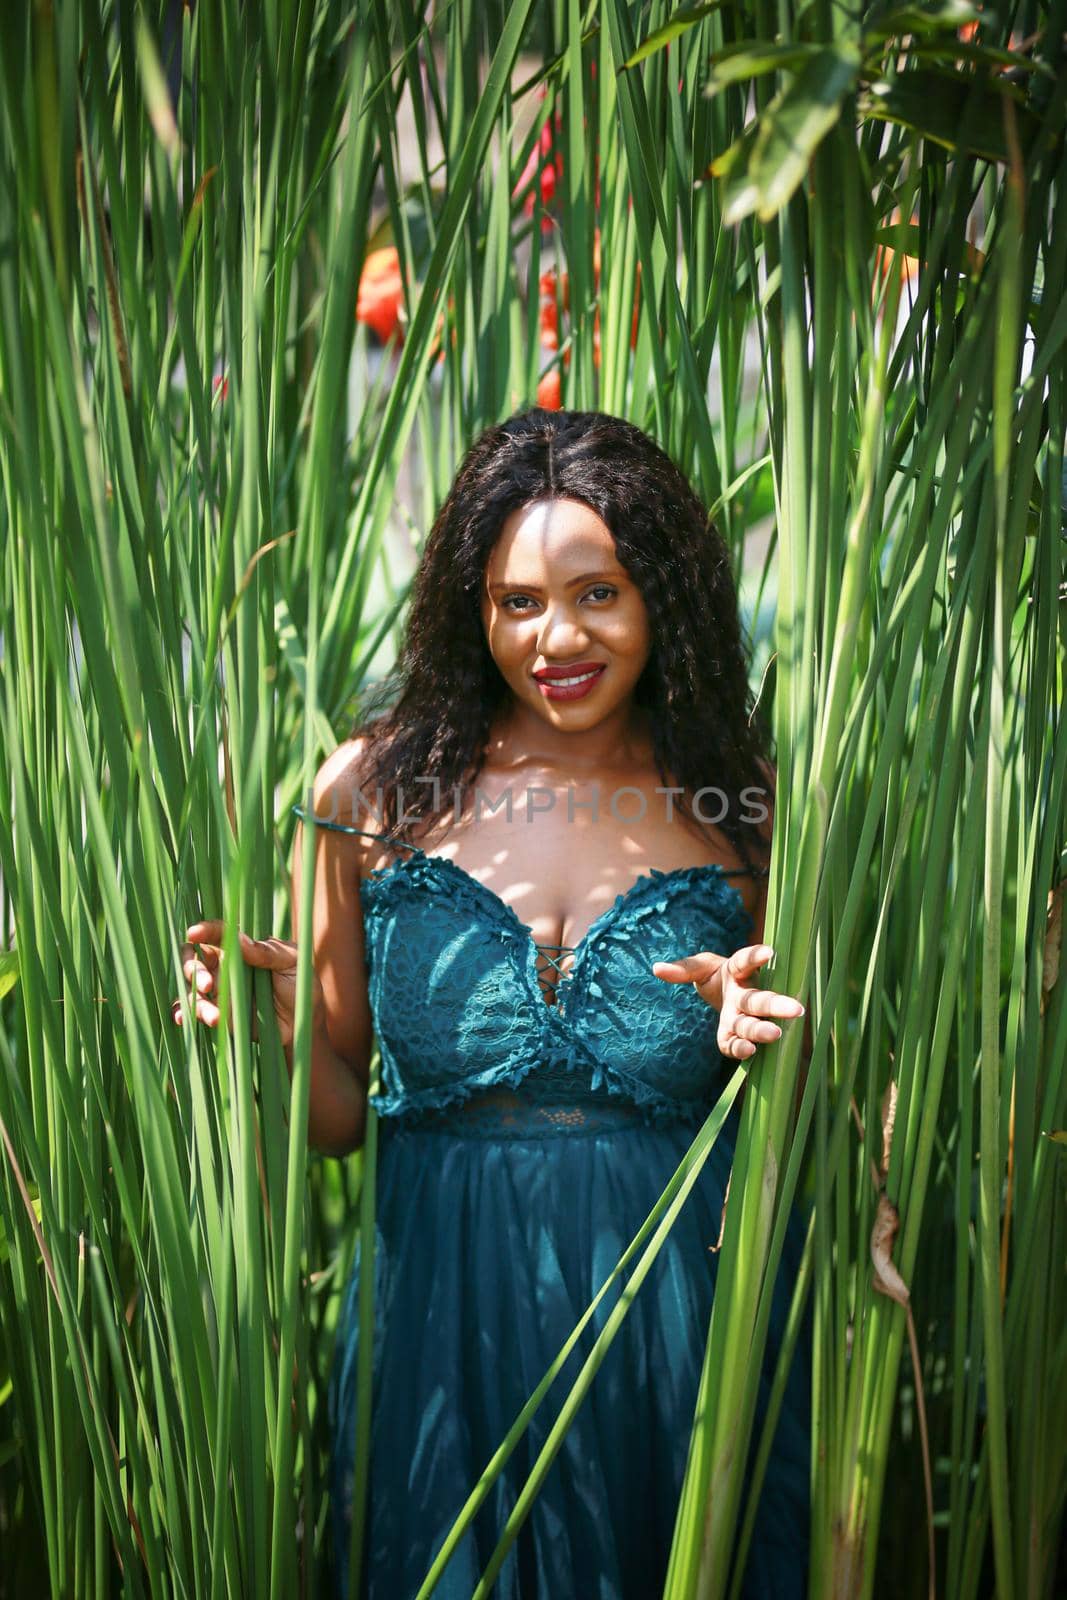 Cheerful young woman standing among tropical leaf.